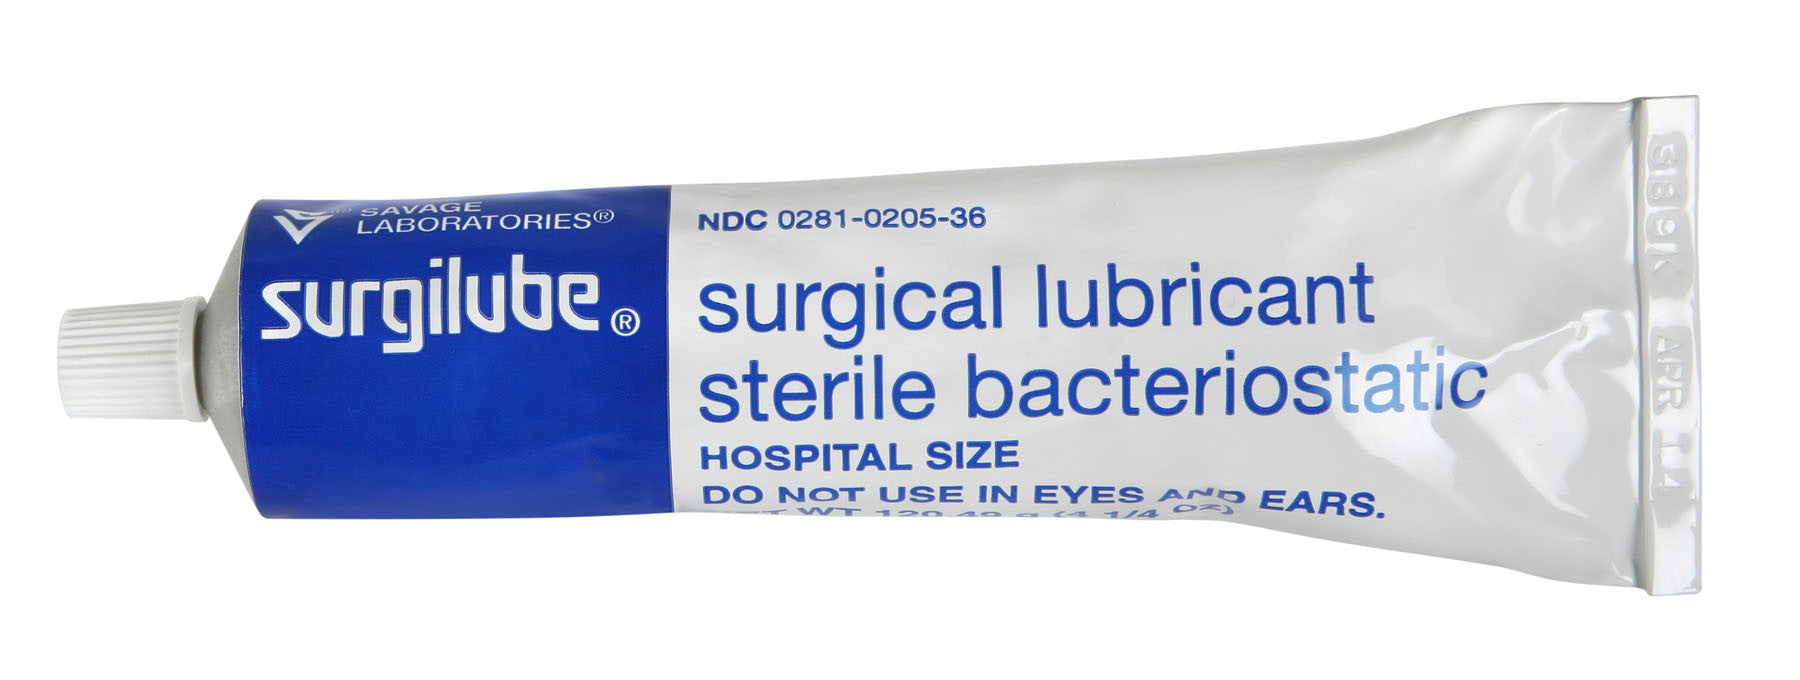 Surgilube Surgical Lubricant By Sandoz Get Complete Care 0914